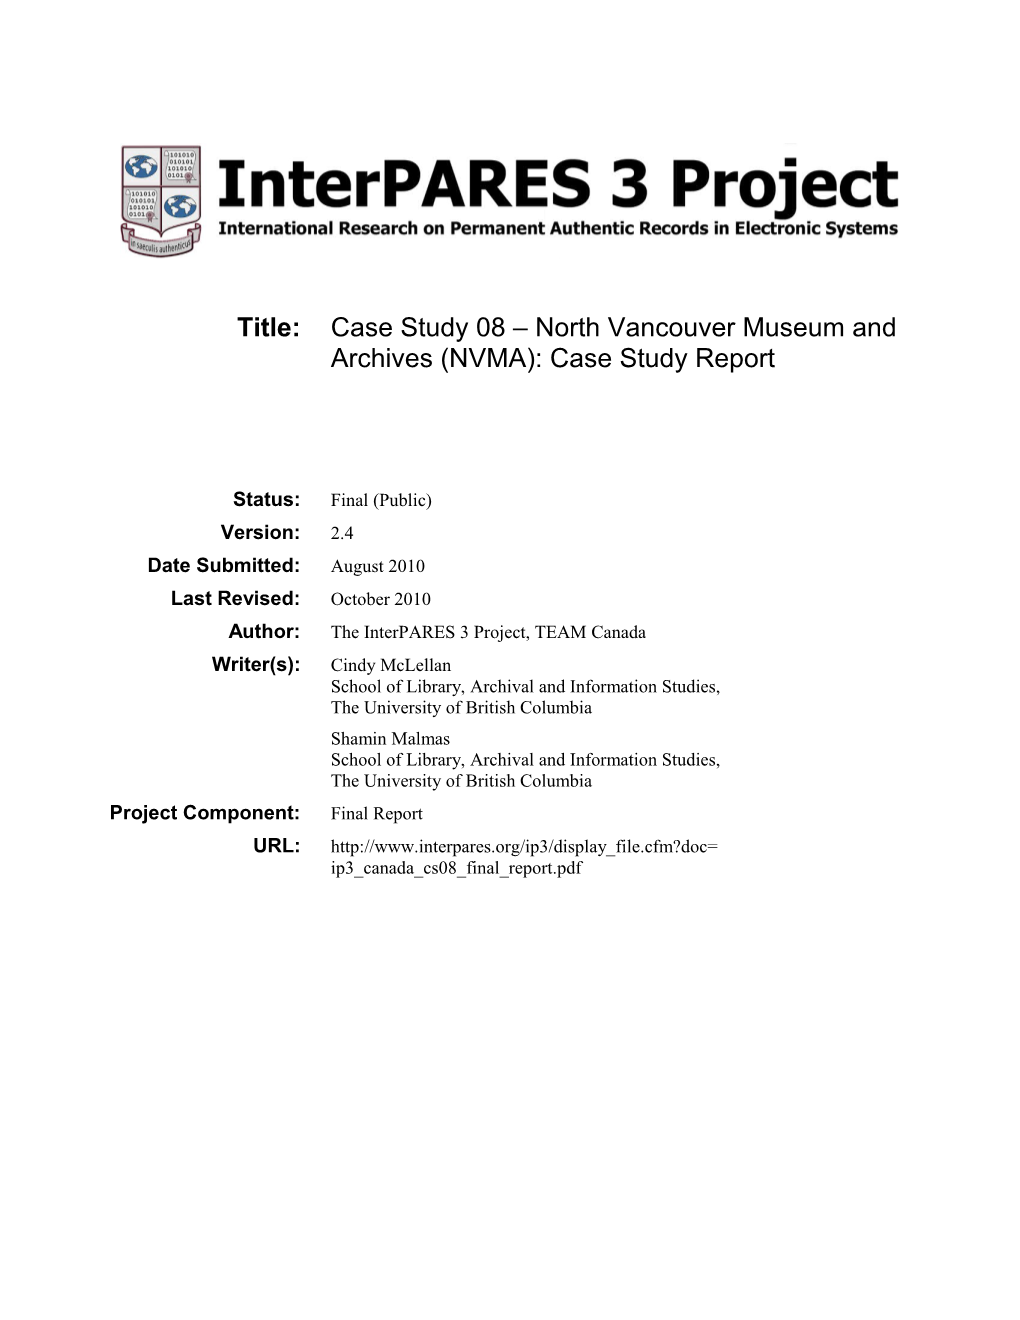 Case Study 08 North Vancouver Museum and Archives (NVMA): Case Study Report